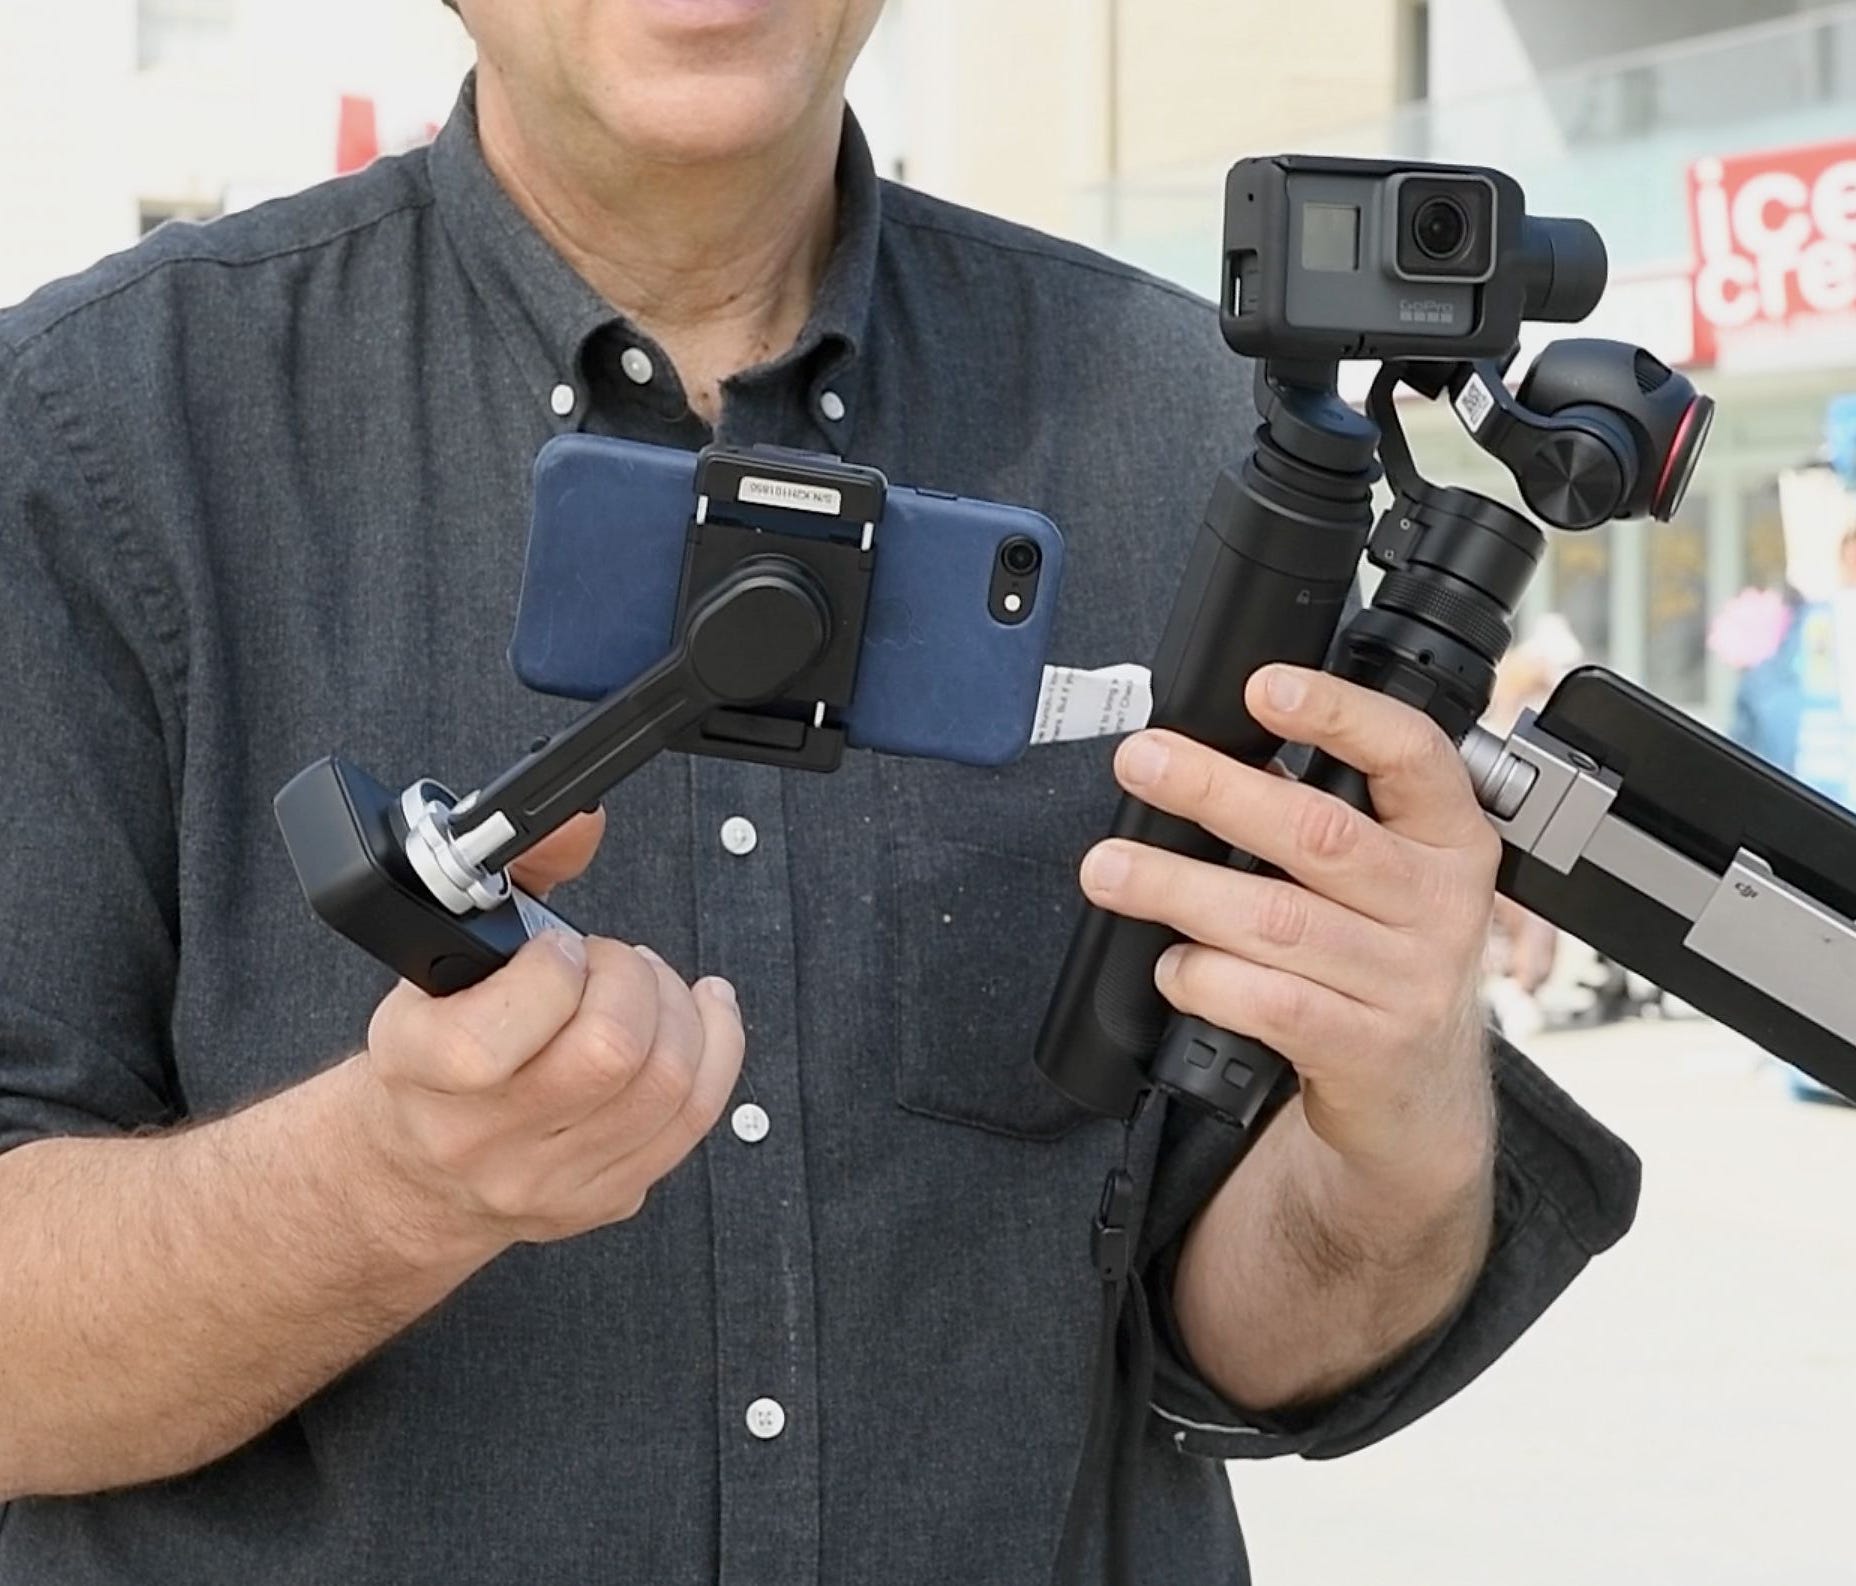 Jefferson Graham tries out three consumer gimbals at Venice Beach: Smove, GoPro Karma and the  DJI Osmo .